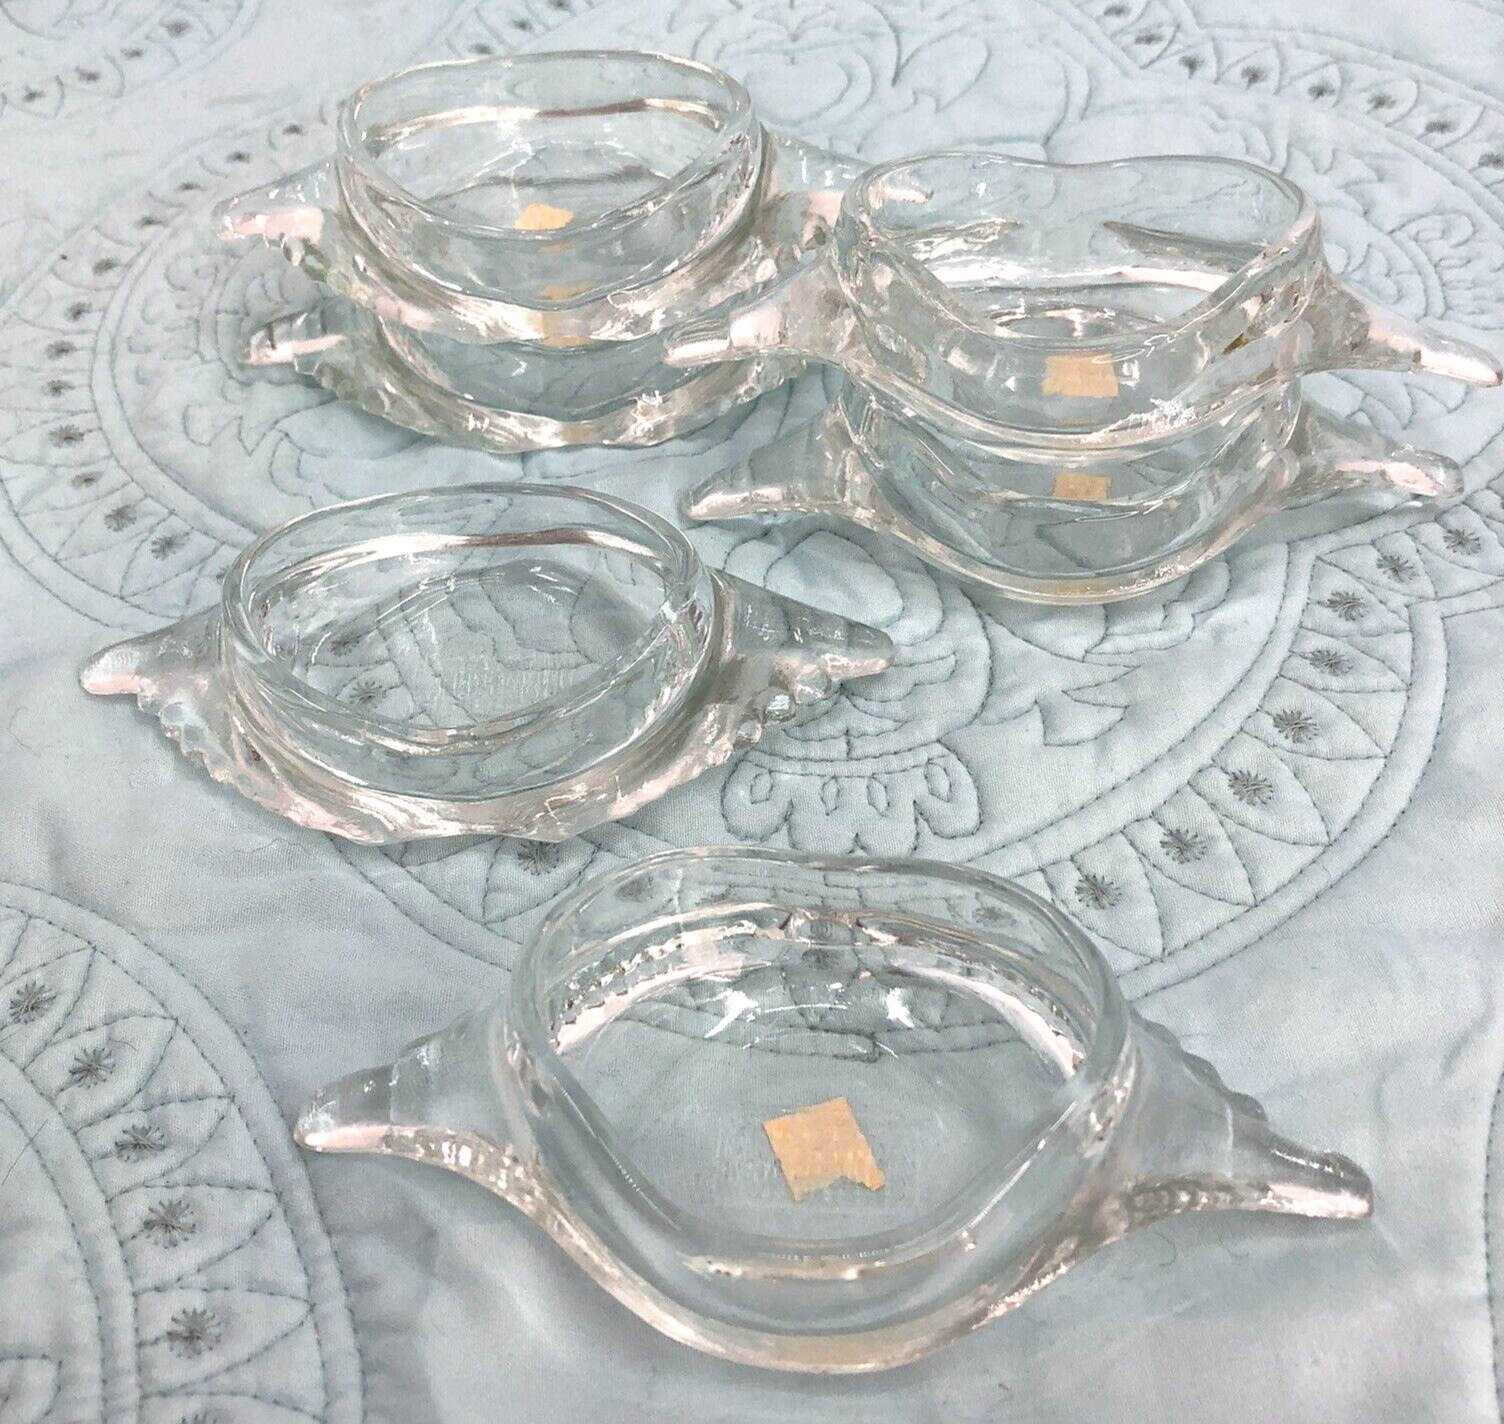 6 Vtg MCM Glasbake Clear Glass Deviled Crab Dishes Imperial Baking Shells USA